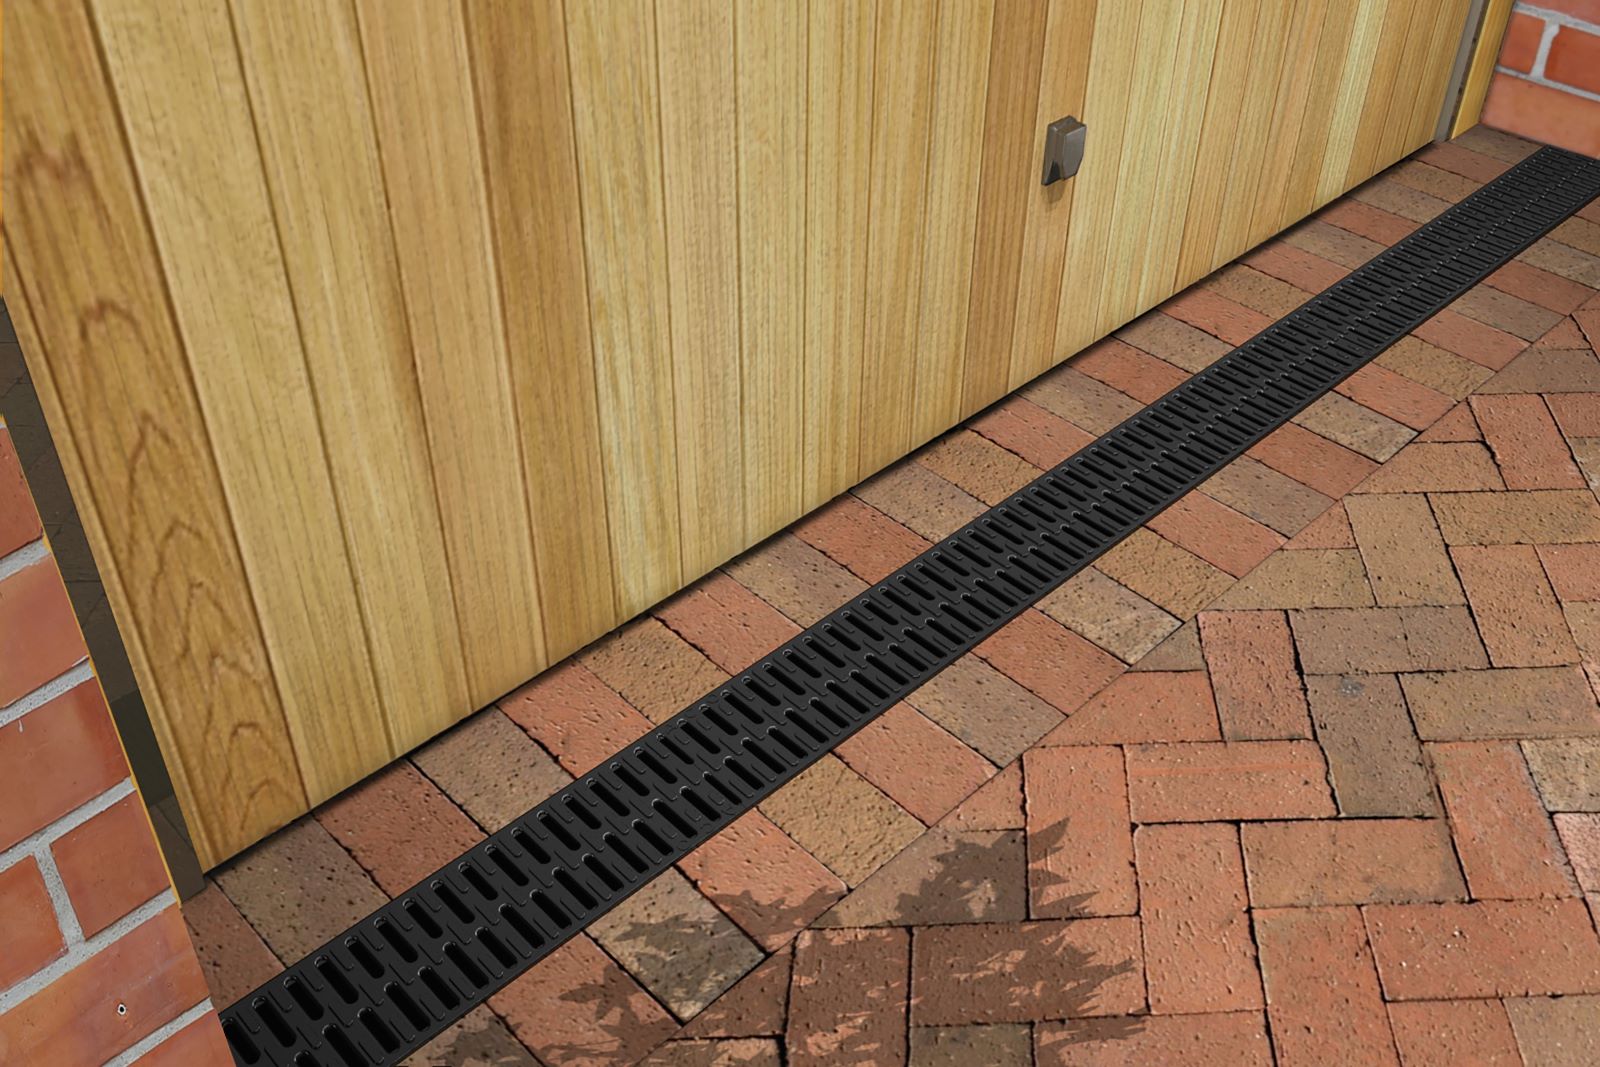 An example of ‘phantom drainage’ in Oxford, where a run of ACO HexDrain has been installed with no endcaps.